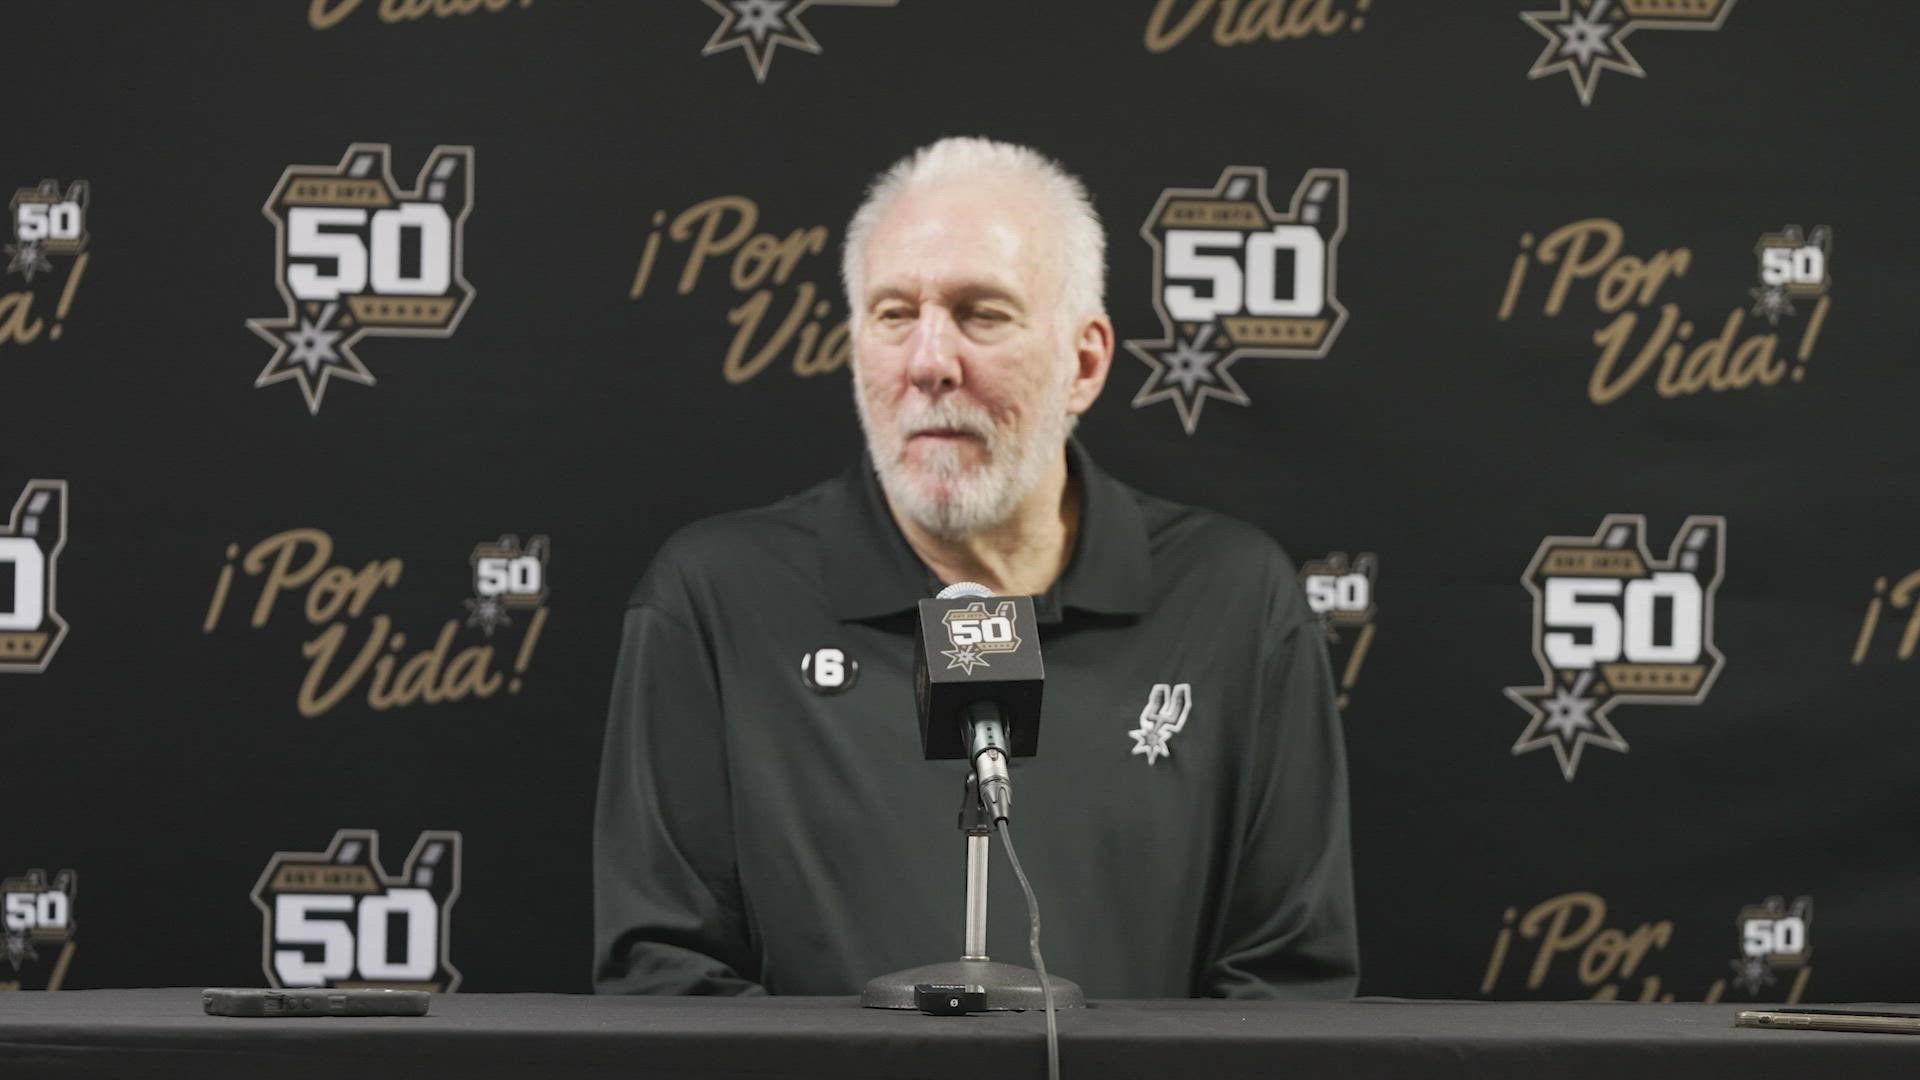 Pop said Dieng is a veteran who commands respects, and Bassey is poised and skilled despite his youth.